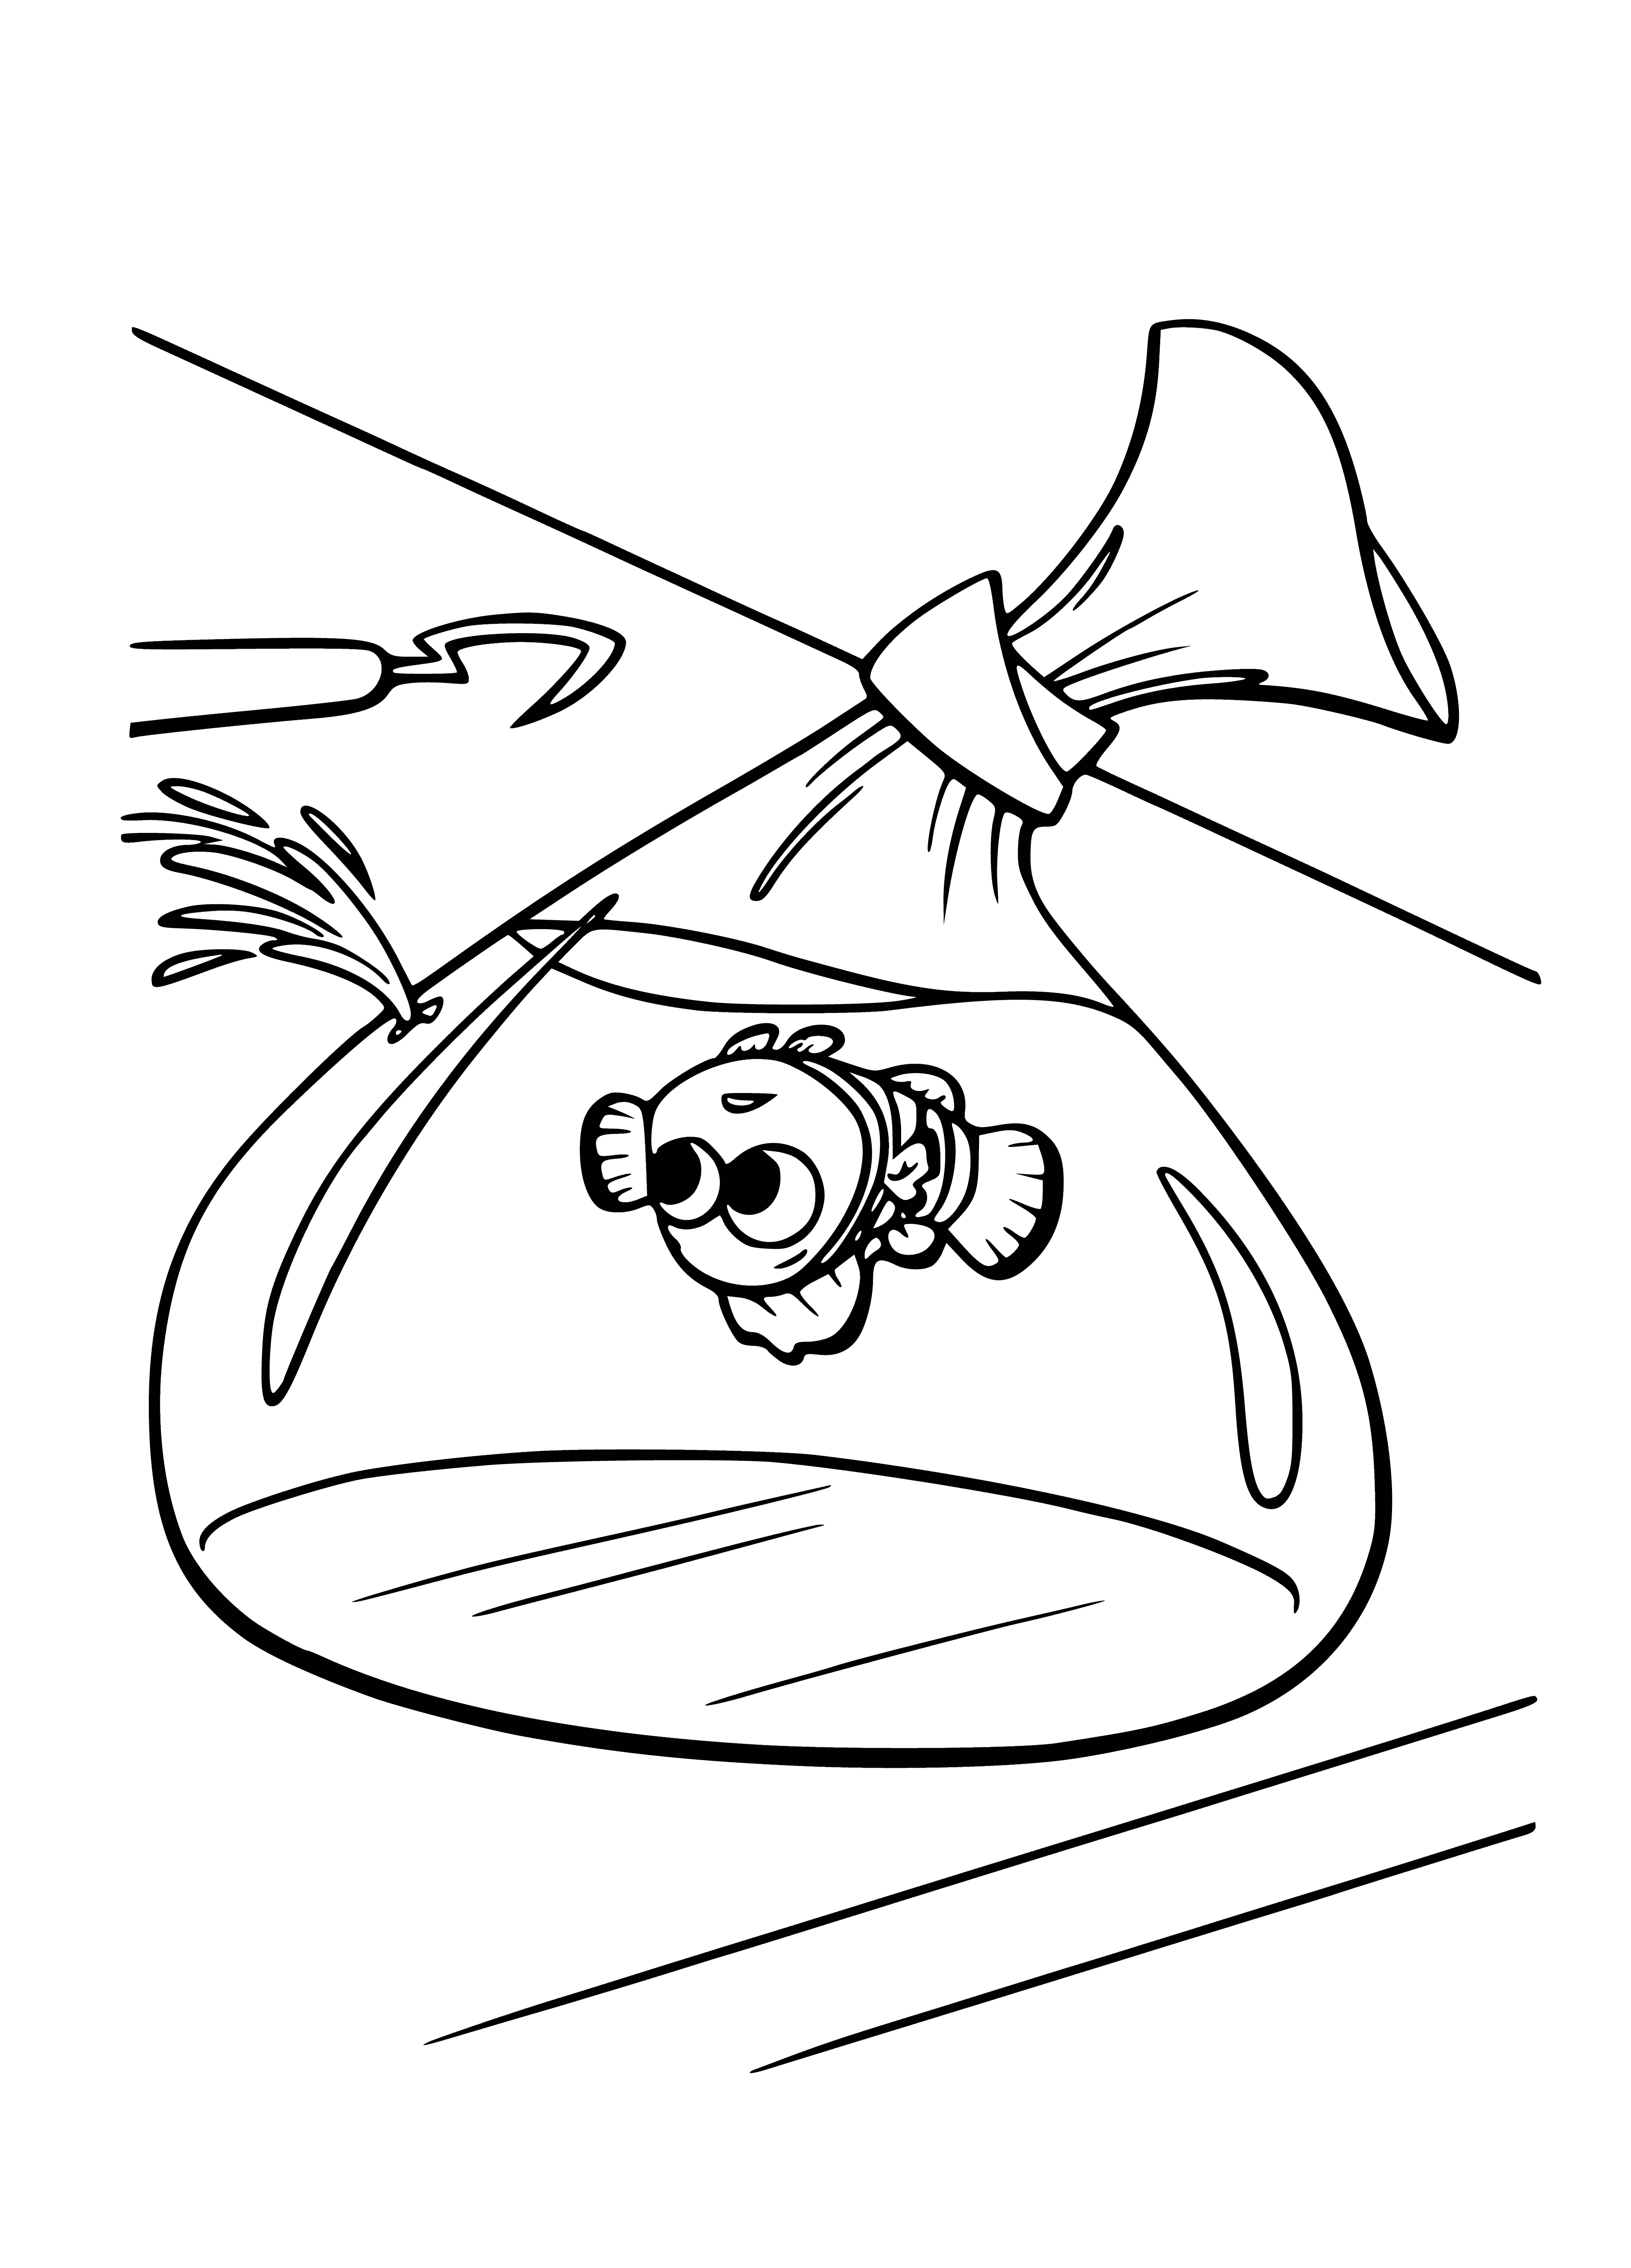 coloring page: Nemo is happily swimming with his orange and white fins and tail, smiling broadly.